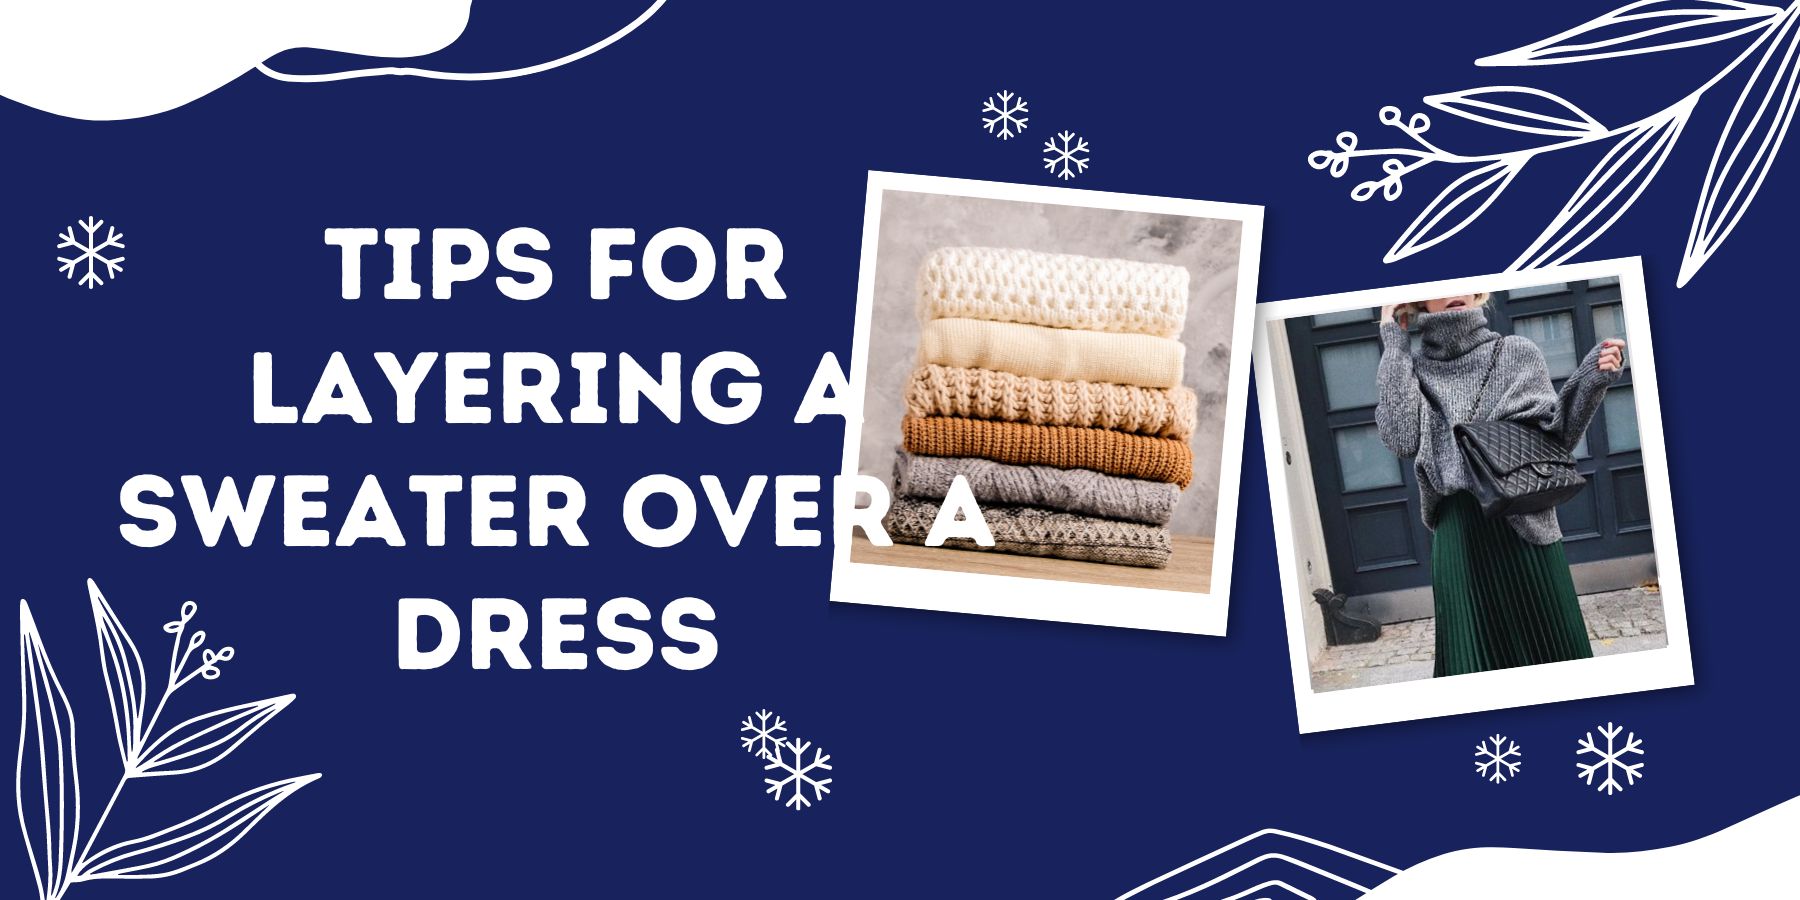 Tips For Layering A Sweater Over A Dress